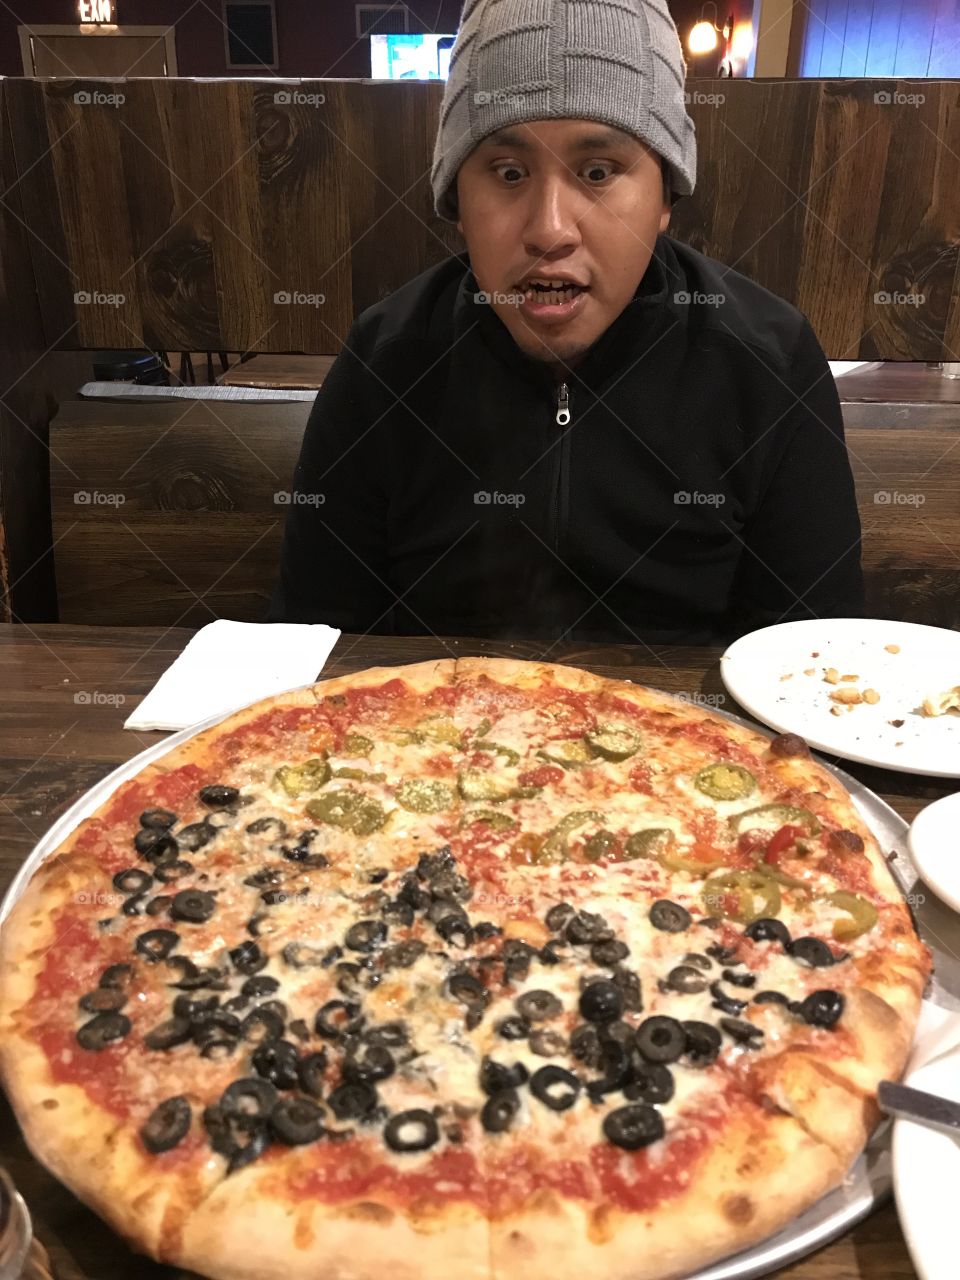 Huge pizza with lots of surprise toppings 